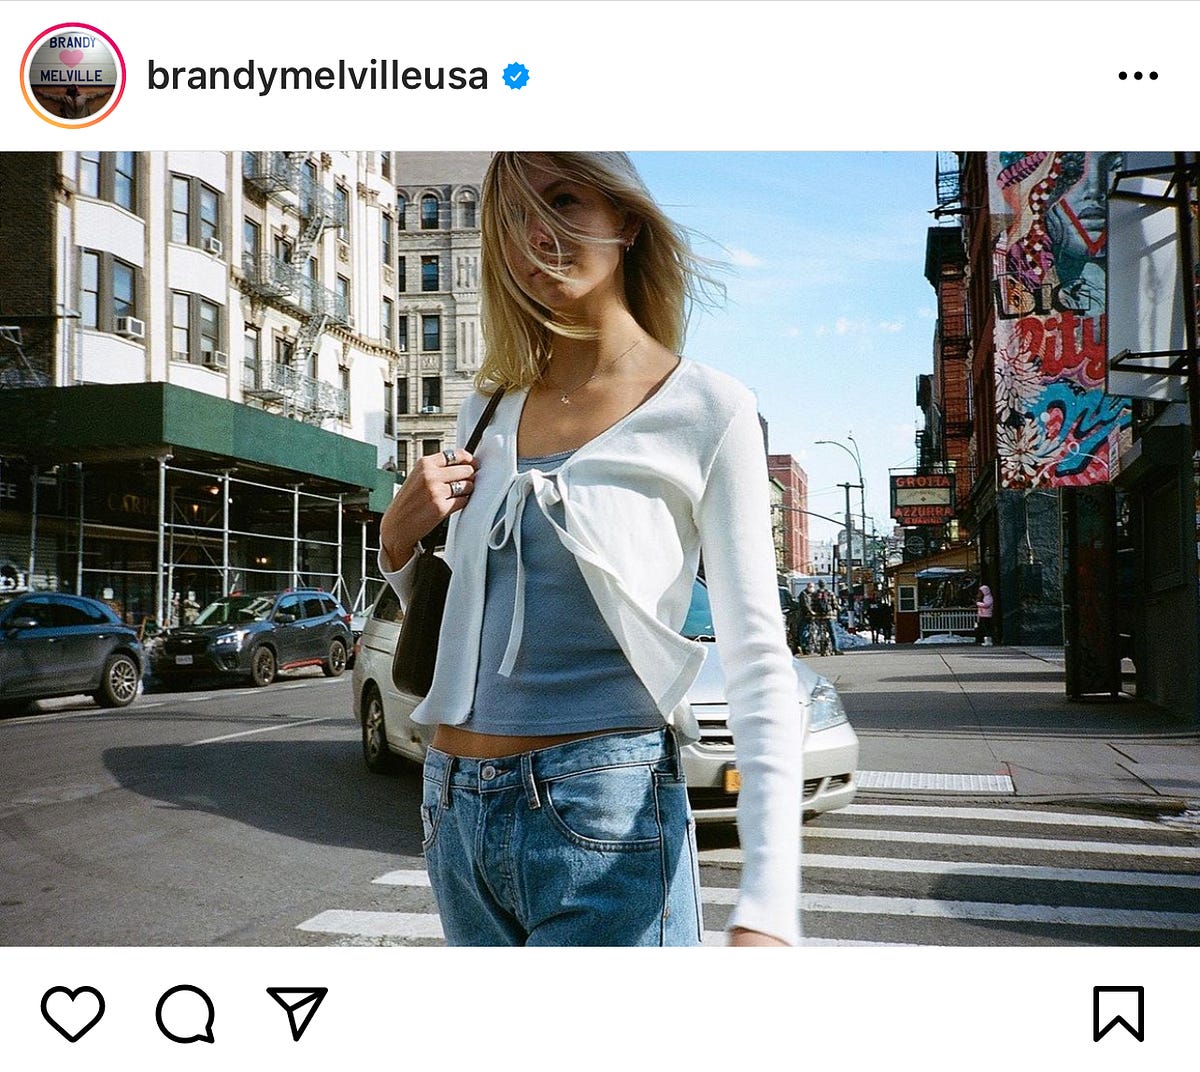 Teens Love Brandy Melville, A Fashion Brand That Sells Only One